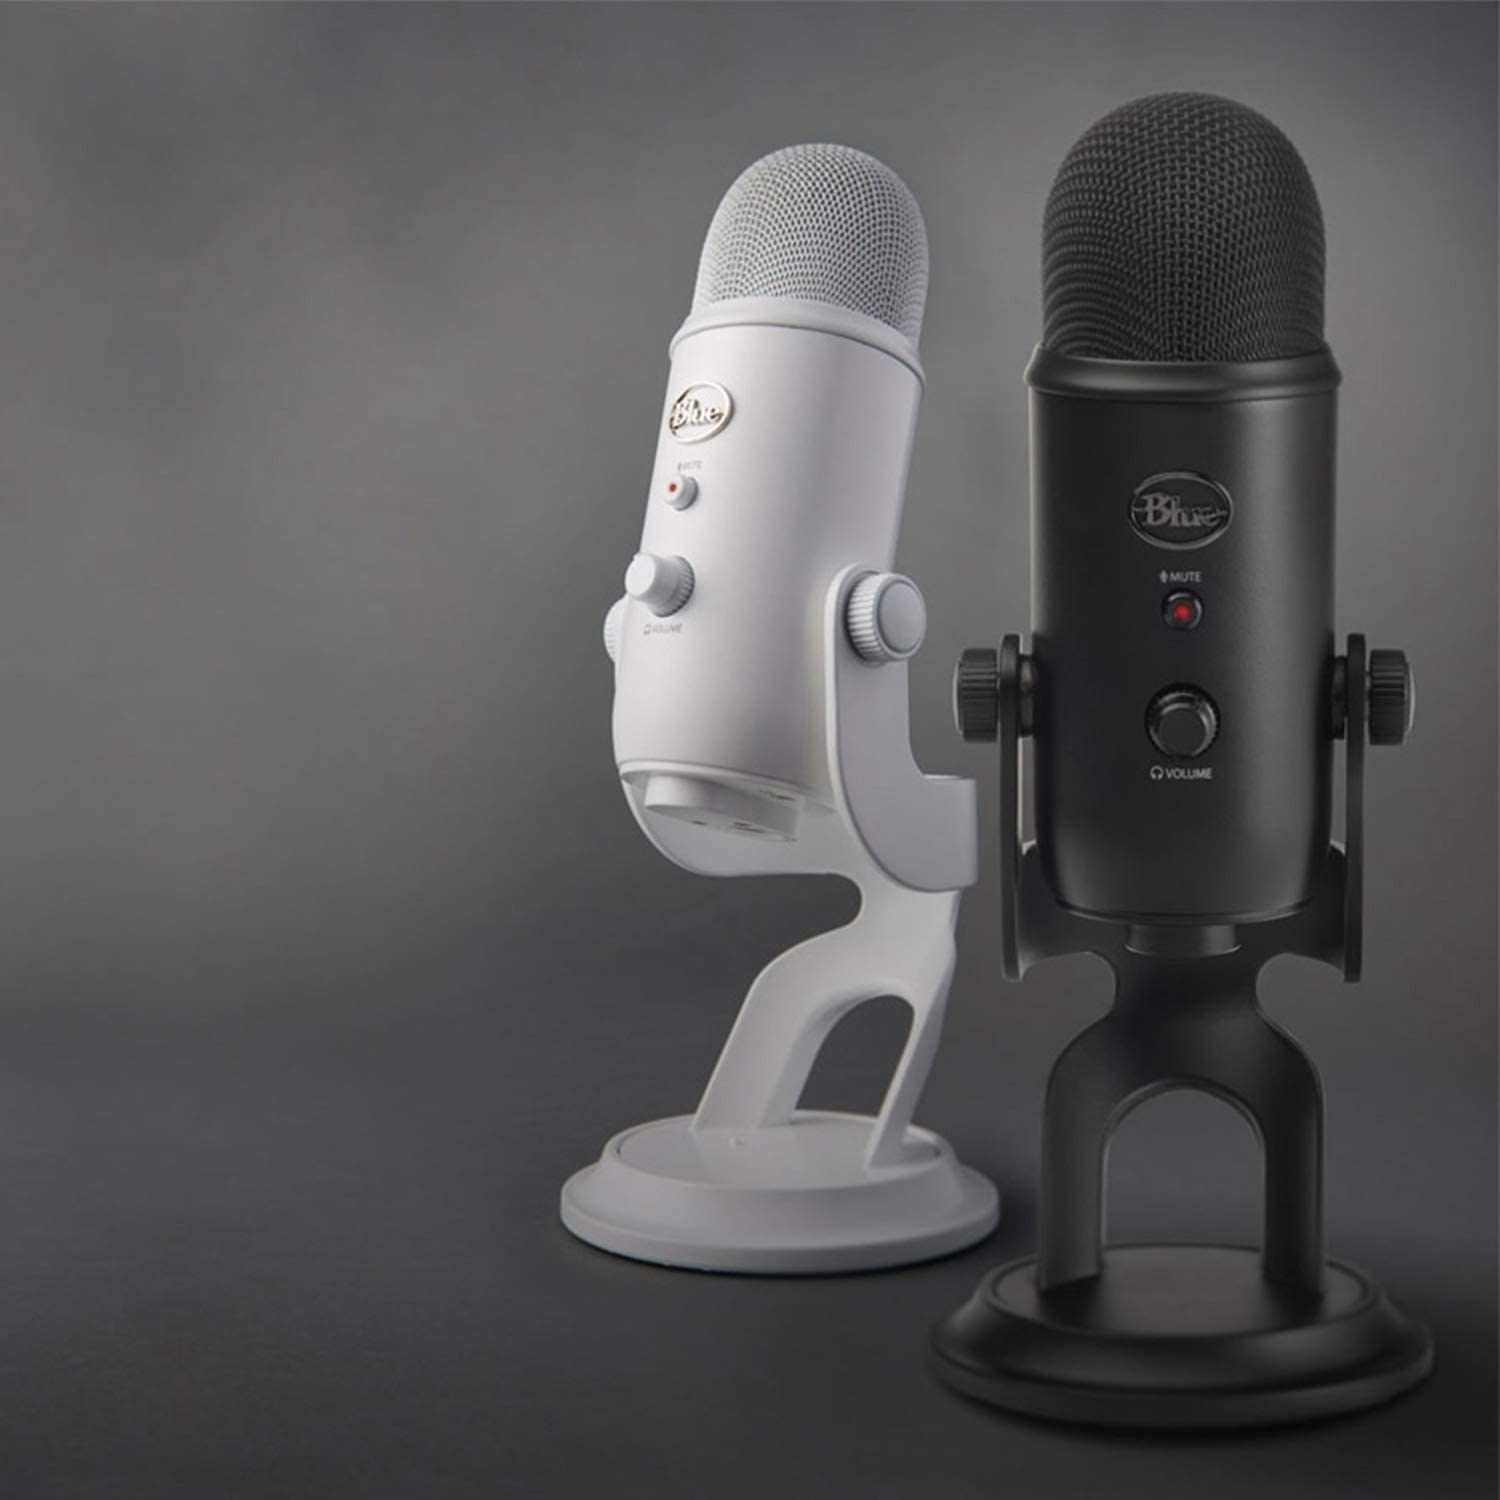 Two stand up mics in white and black